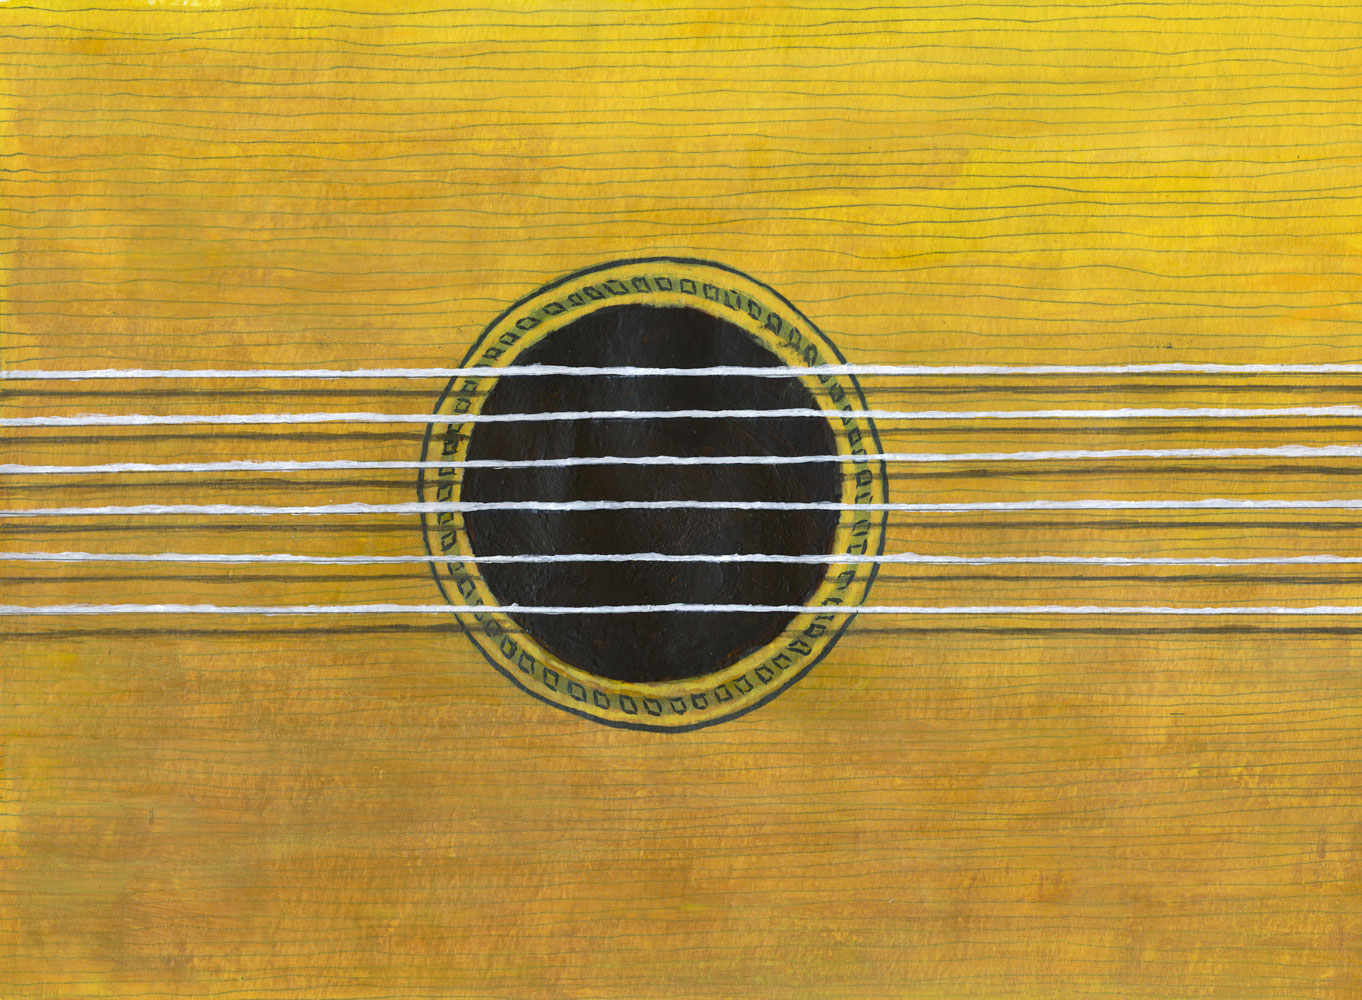 2020-11-21-strings-and-sound-hole